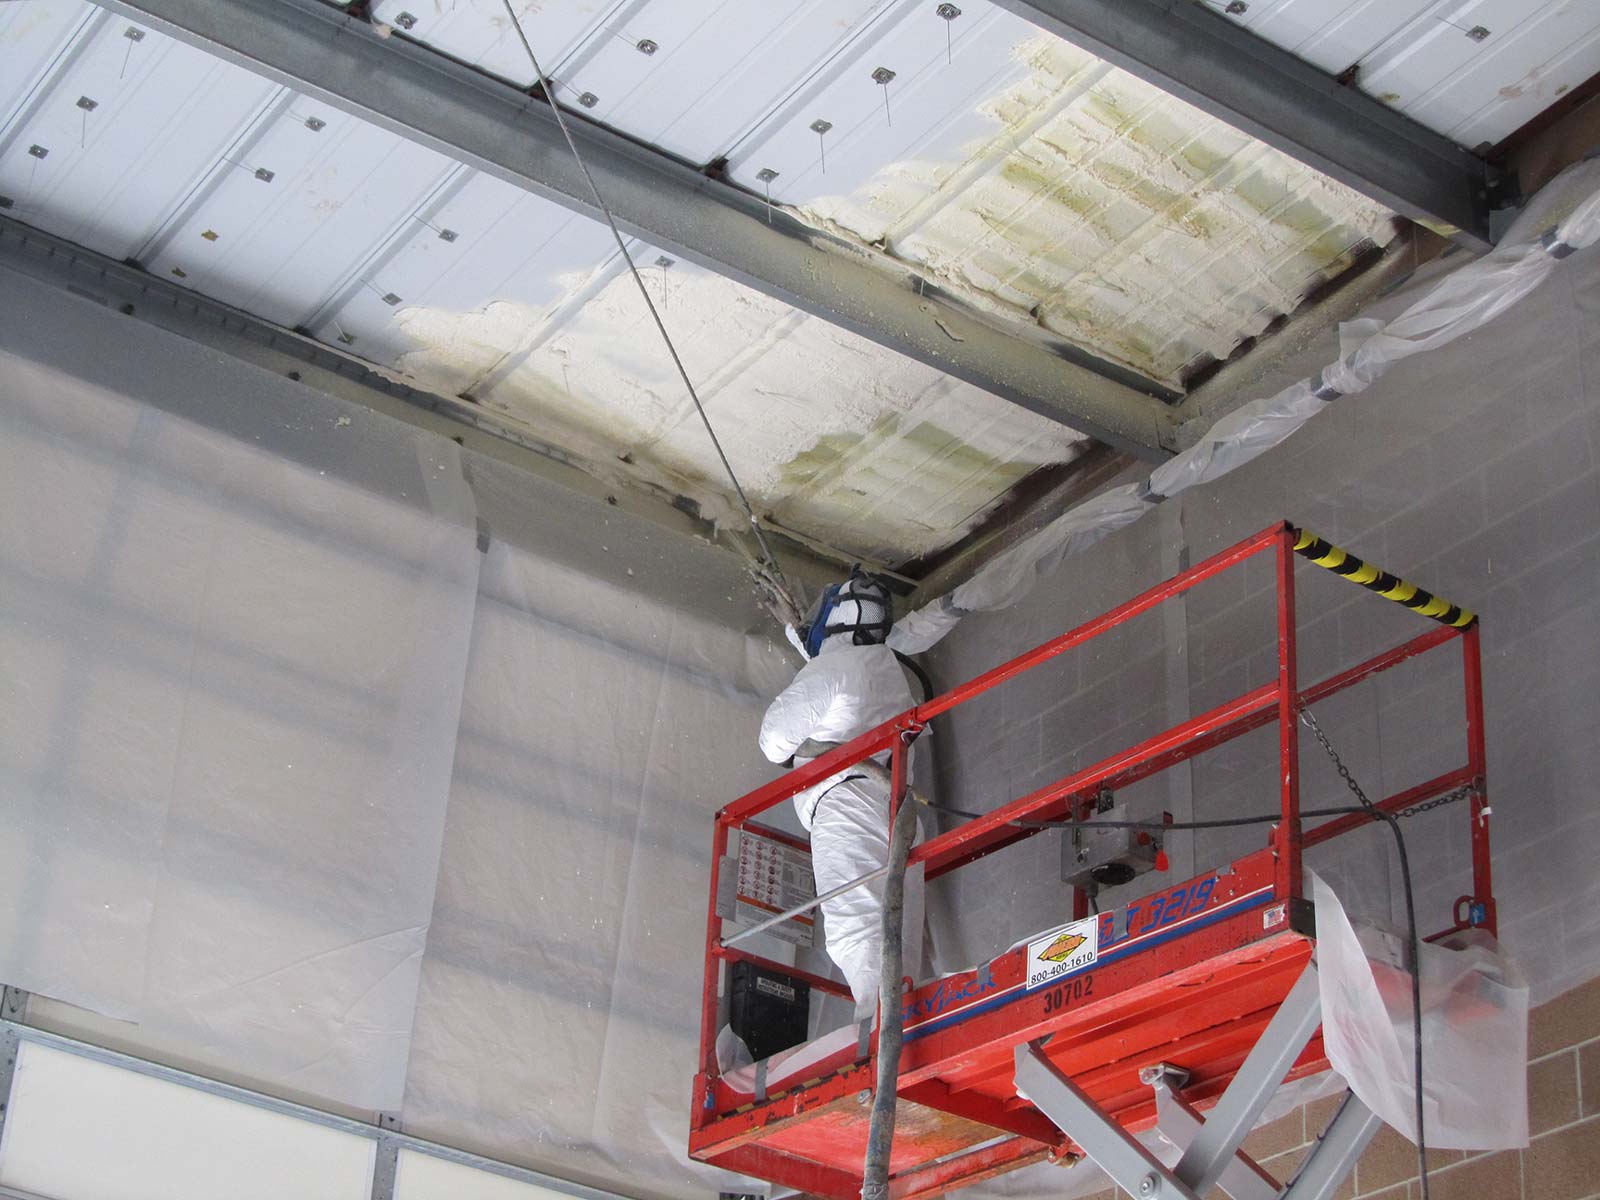 A worker on a platform spraying foam insulation into the ceiling of a metal building